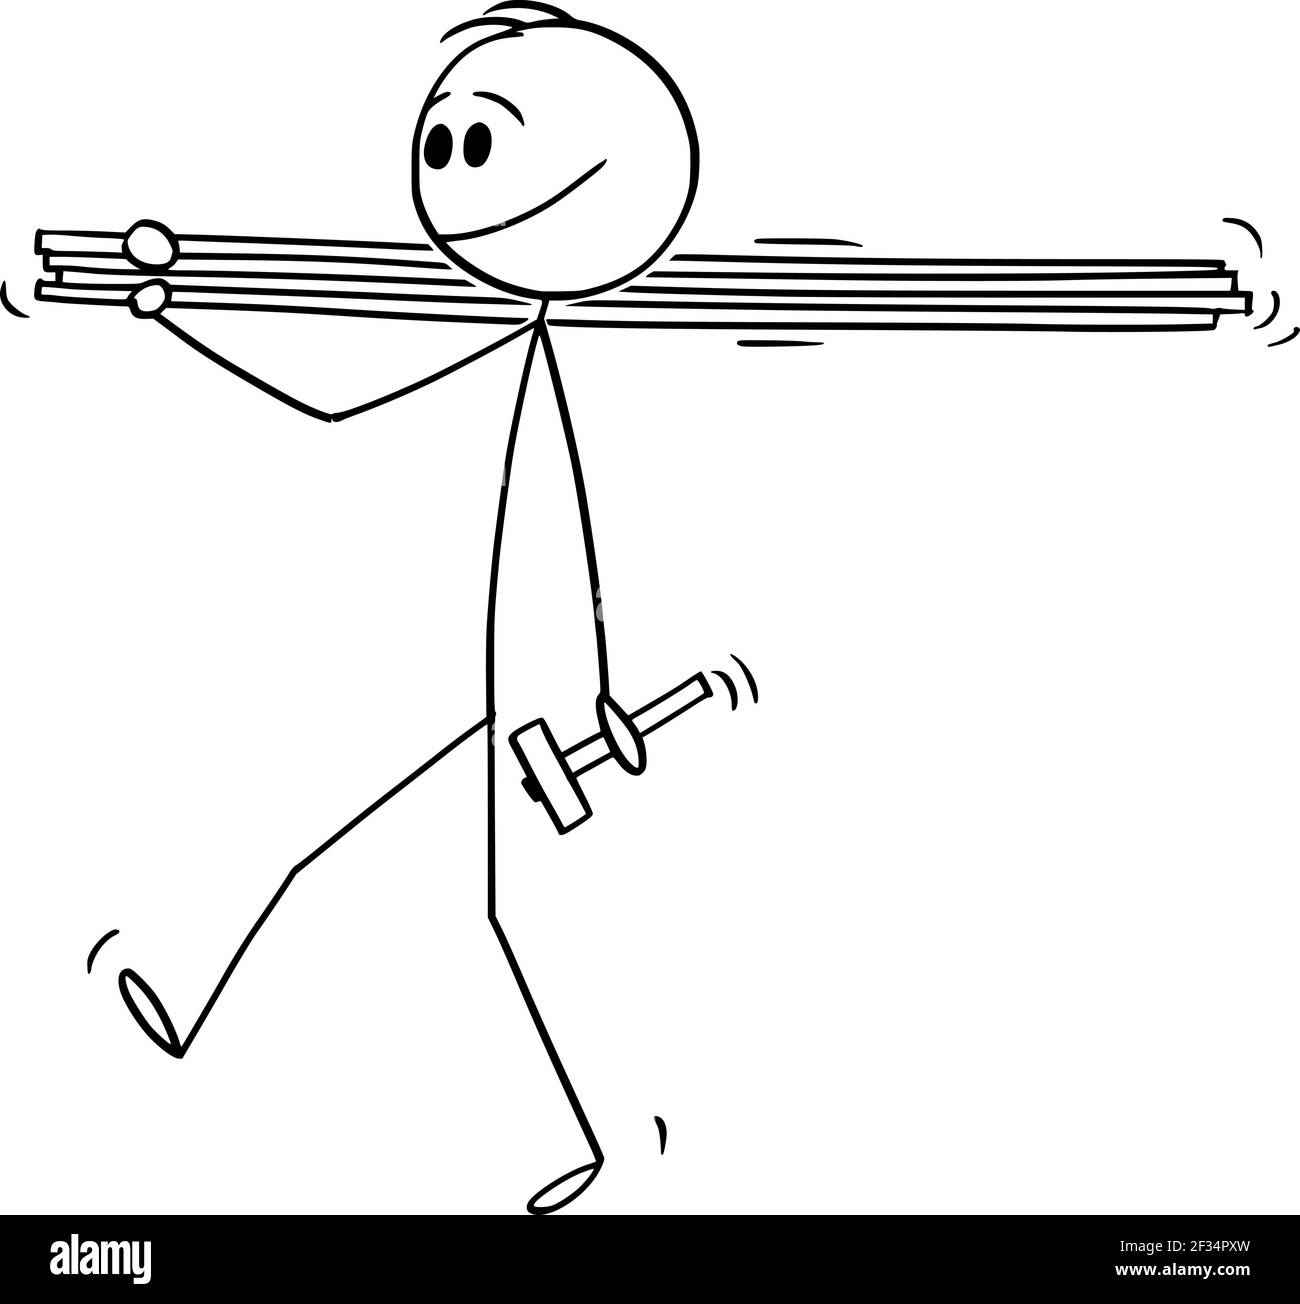 Man Carrying Wood Boards or Planks and Hammer, Vector Cartoon Stick Figure Illustration Stock Vector